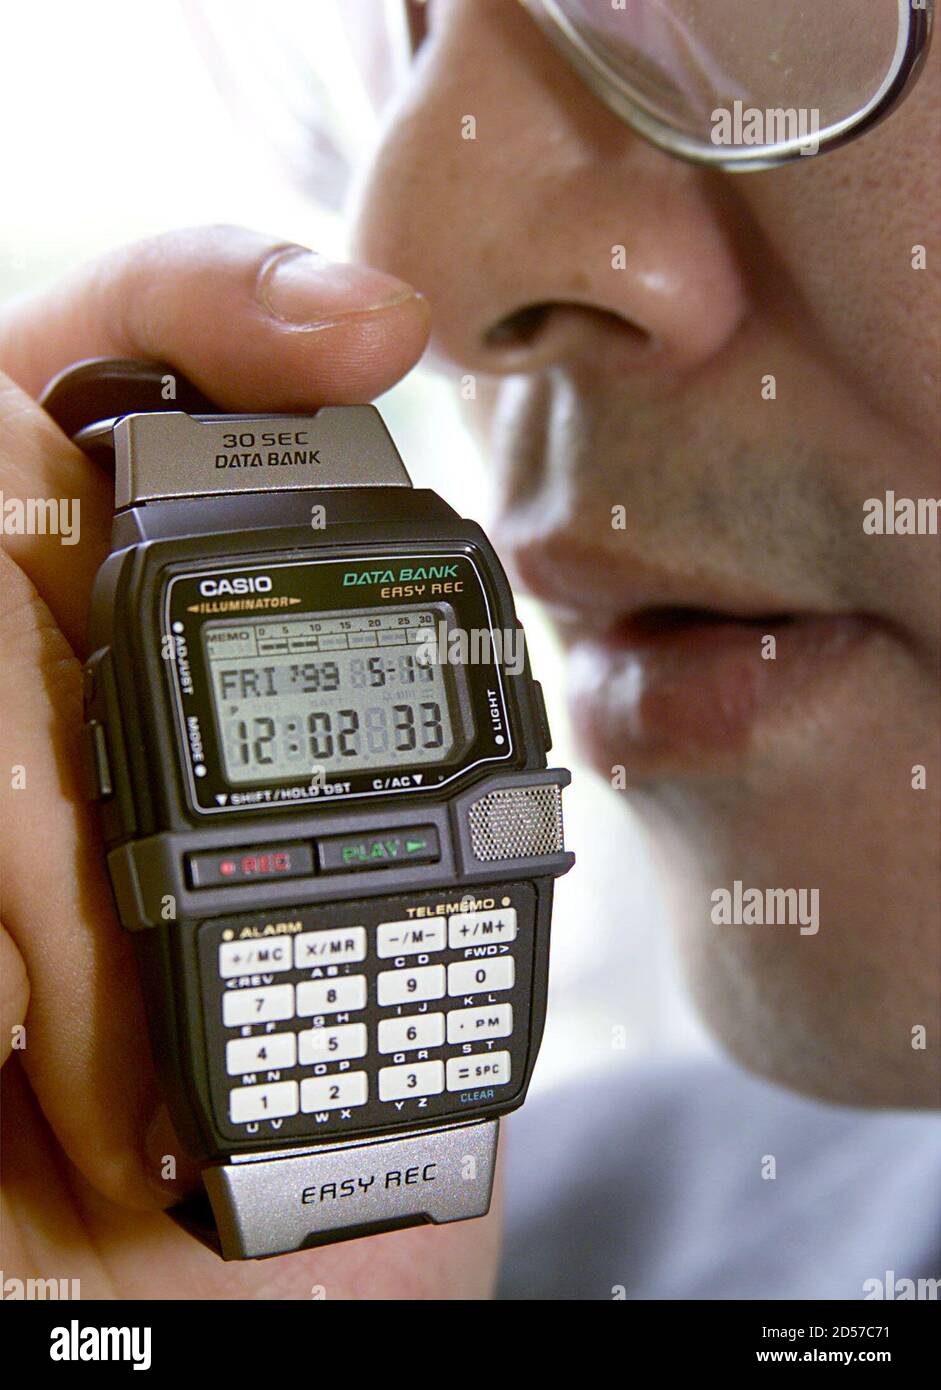 Casio Computer introduces its new "Easy Rec" databank watch with integrated  circuit (IC) recording capabilities, enabling users to record a 30-second  memo by speaking into its microphone, at the company headquarters in